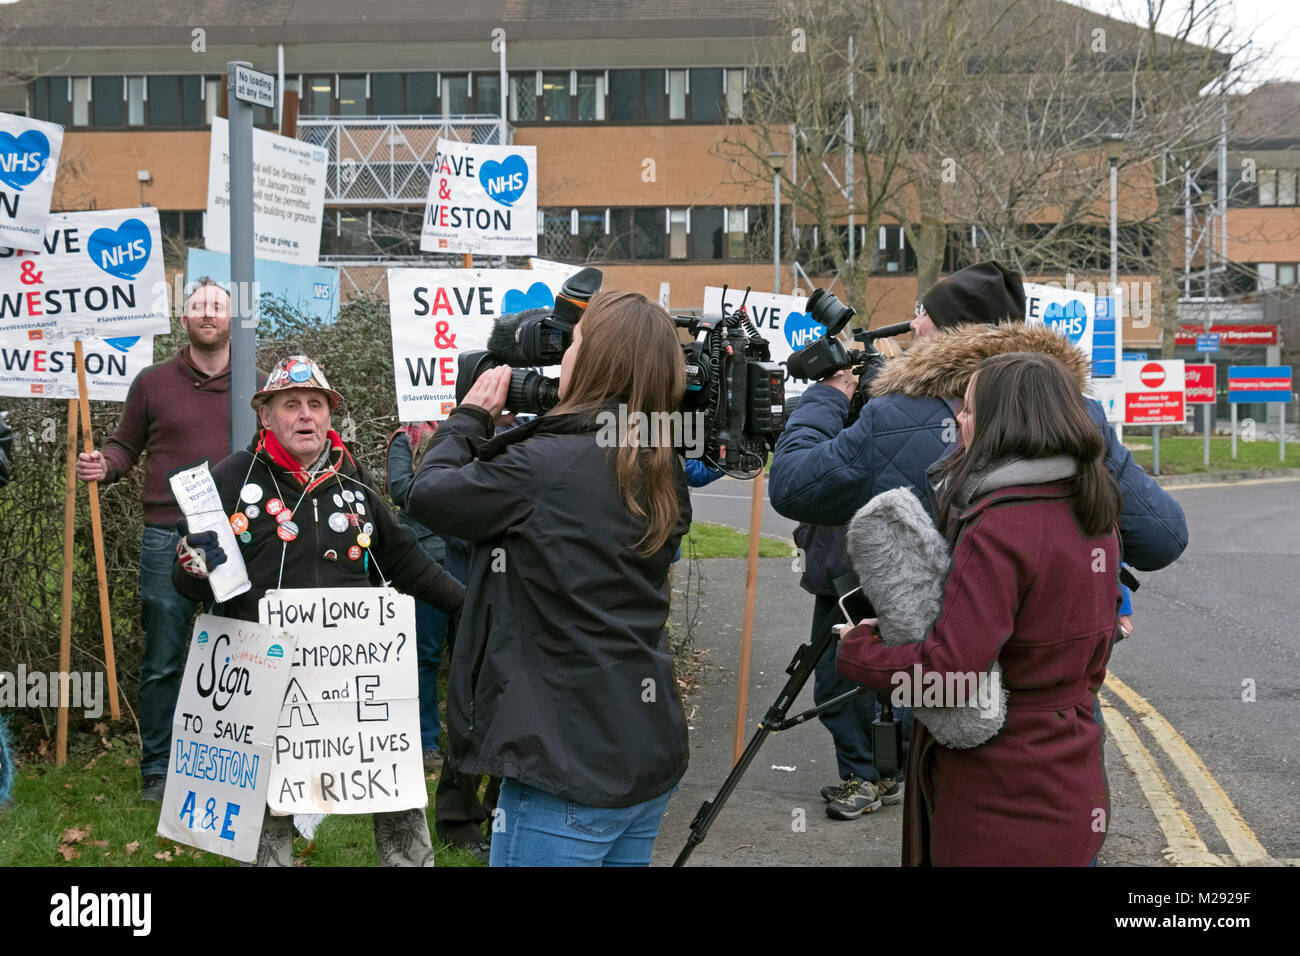 Weston-super-Mare, UK. 6th February, 2018. Demonstrators protest against the overnight closure of the accident and emergency department at Weston General Hospital. Despite assurances that the closure is only a temporary measure, it has been in effect since July 2017, and a recent proposal for a merger between Weston Area Health NHS Trust and University Hospitals Bristol NHS Foundation Trust has created further uncertainty about Weston General Hospital’s future. Keith Ramsey/Alamy Live News Stock Photo